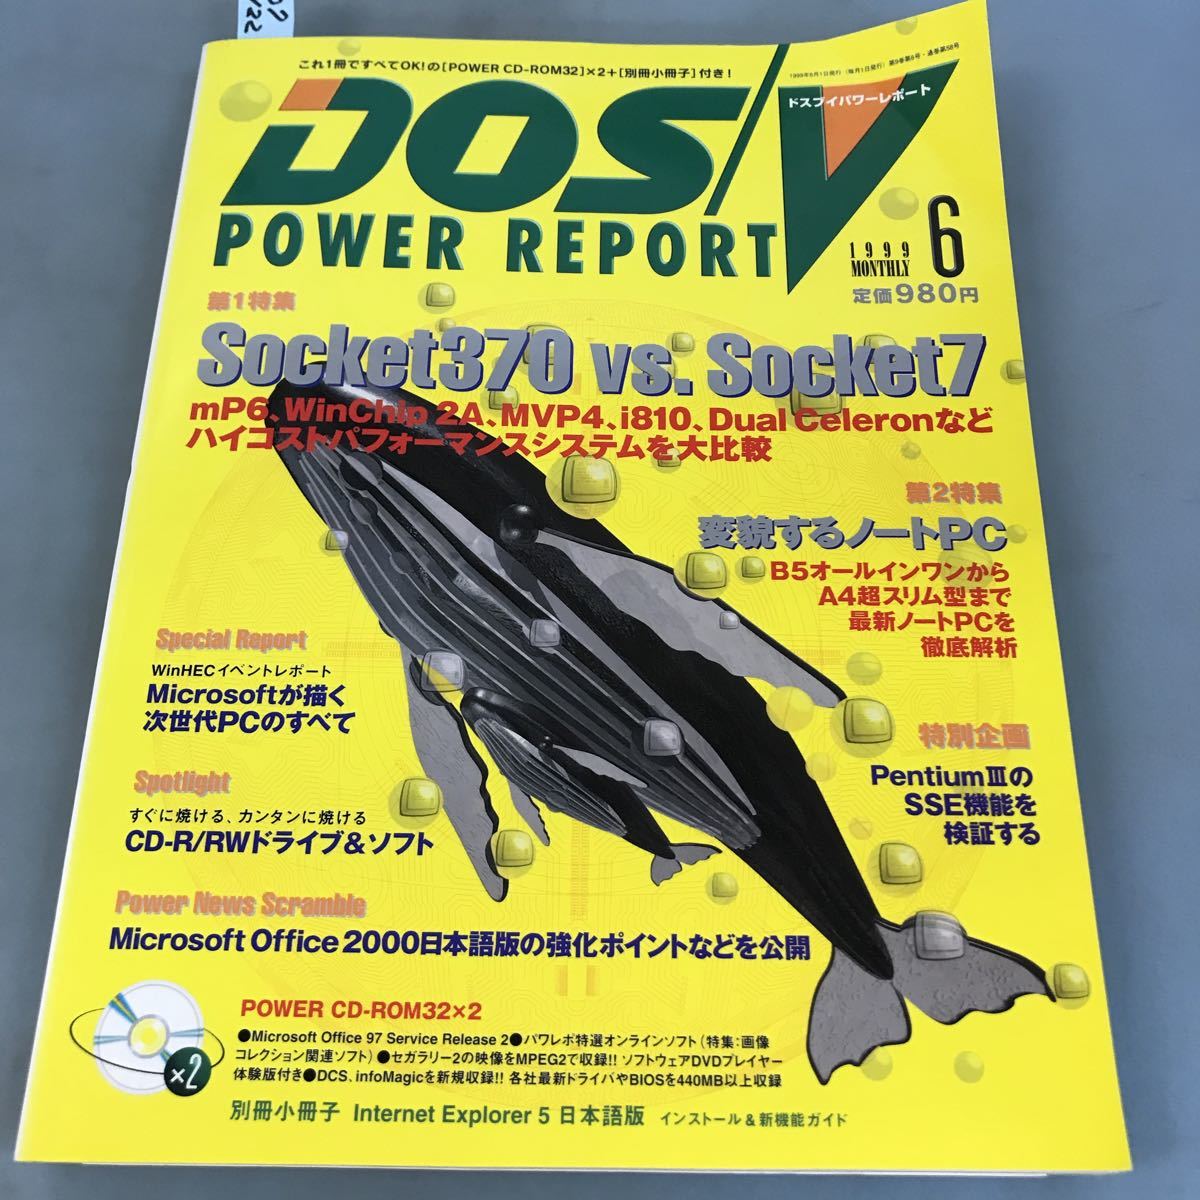 A07-122 DOS／ＶPOWER REPORT 1999 MONTHLY 6 特集 Socket370 vs.Socket7変貌するノートPC impress